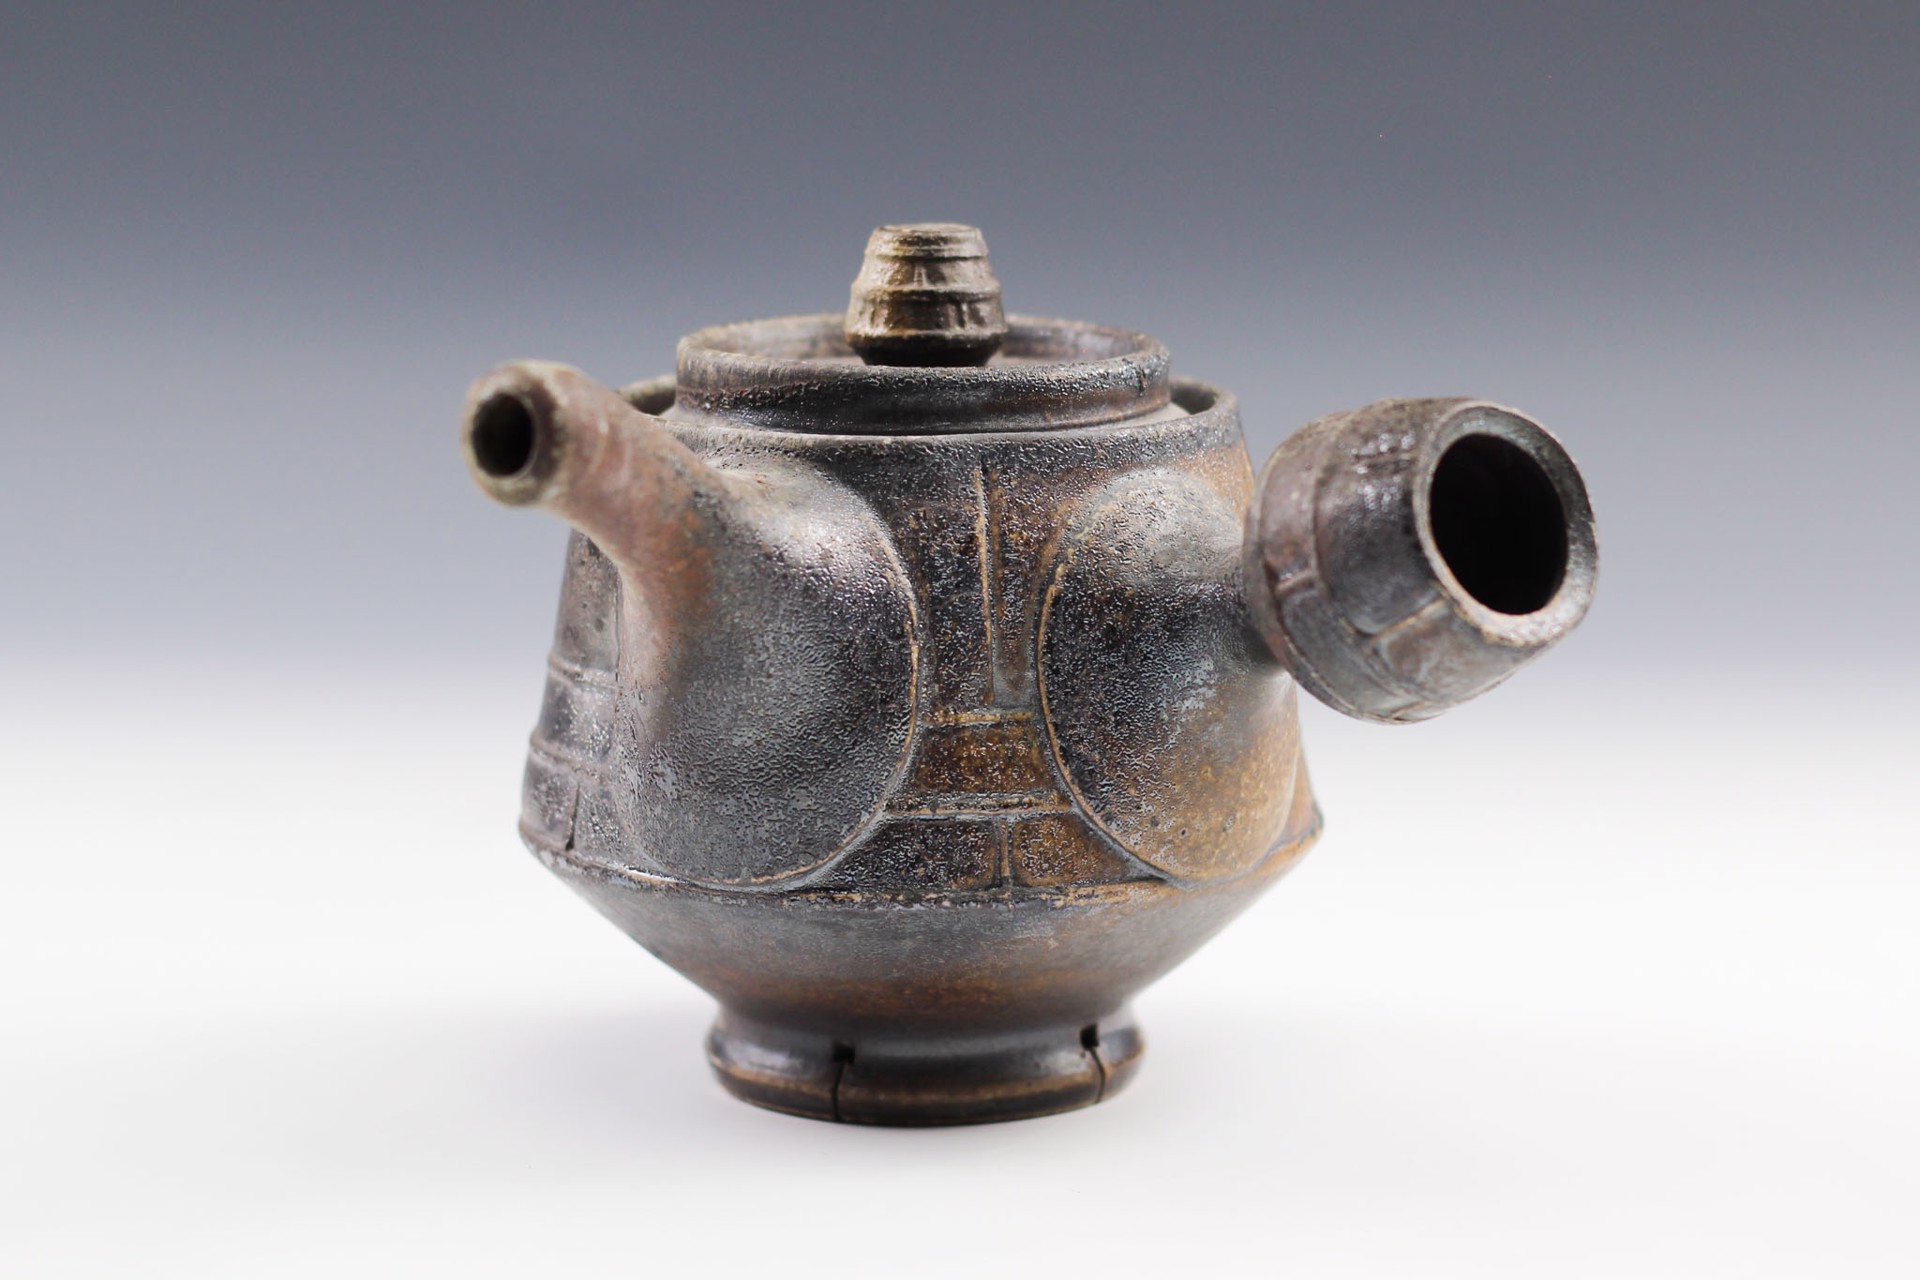 Teapot by Ted Neal